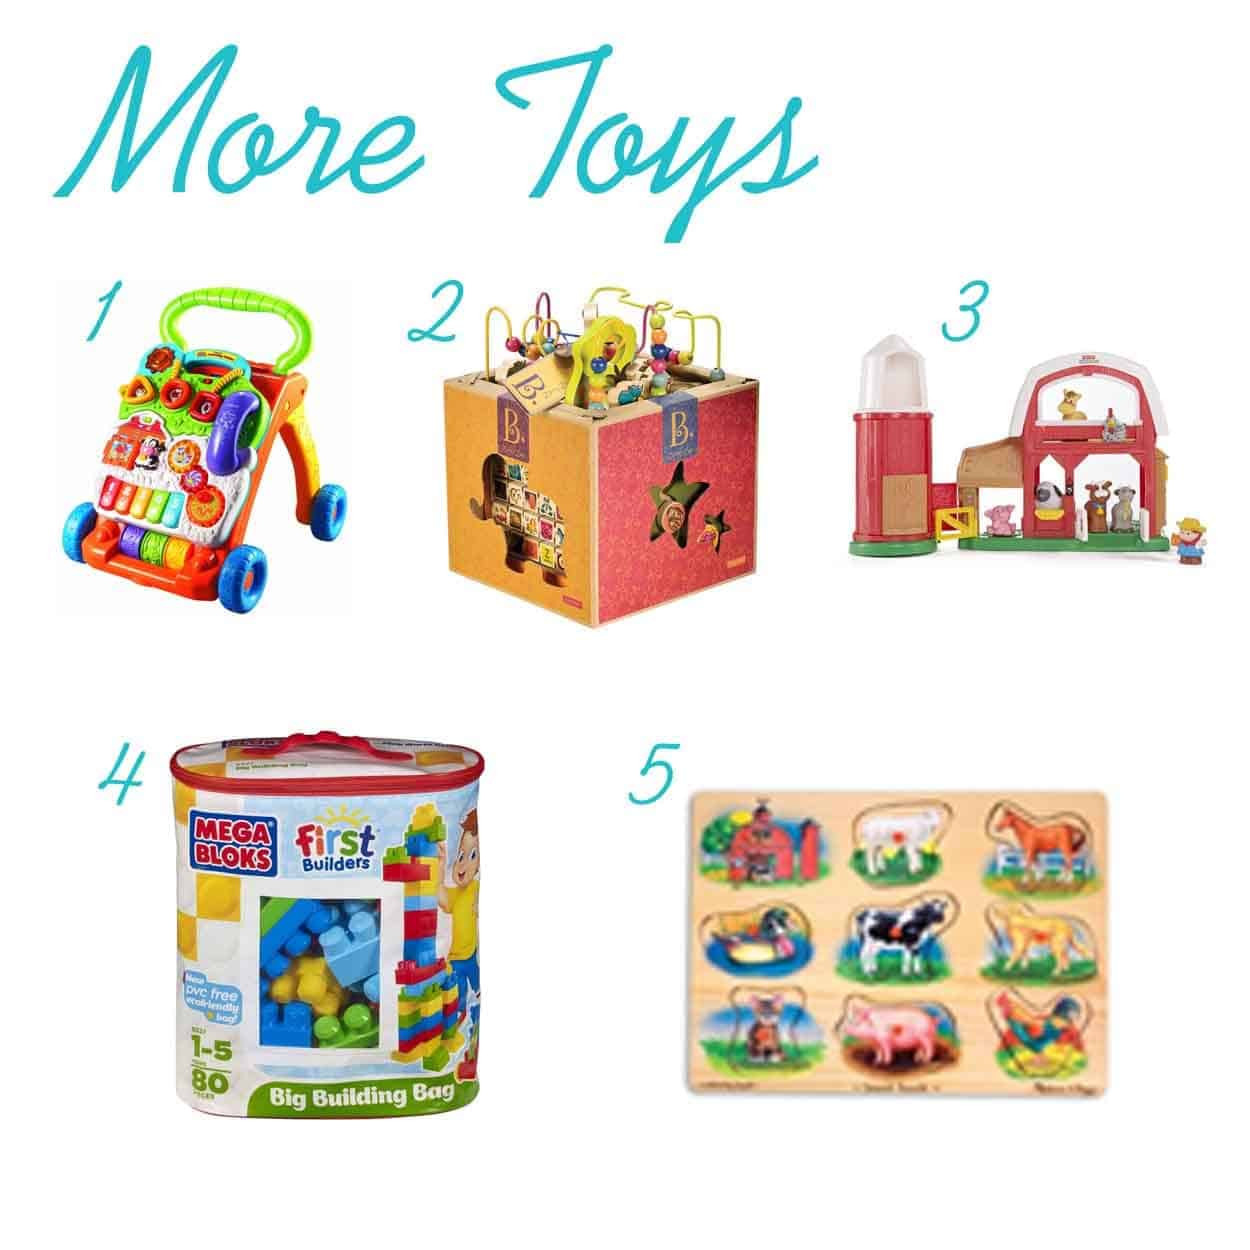 Gift Ideas For 1 Year Old Boys
 The Ultimate Gift List for a 1 Year Old Boy • The Pinning